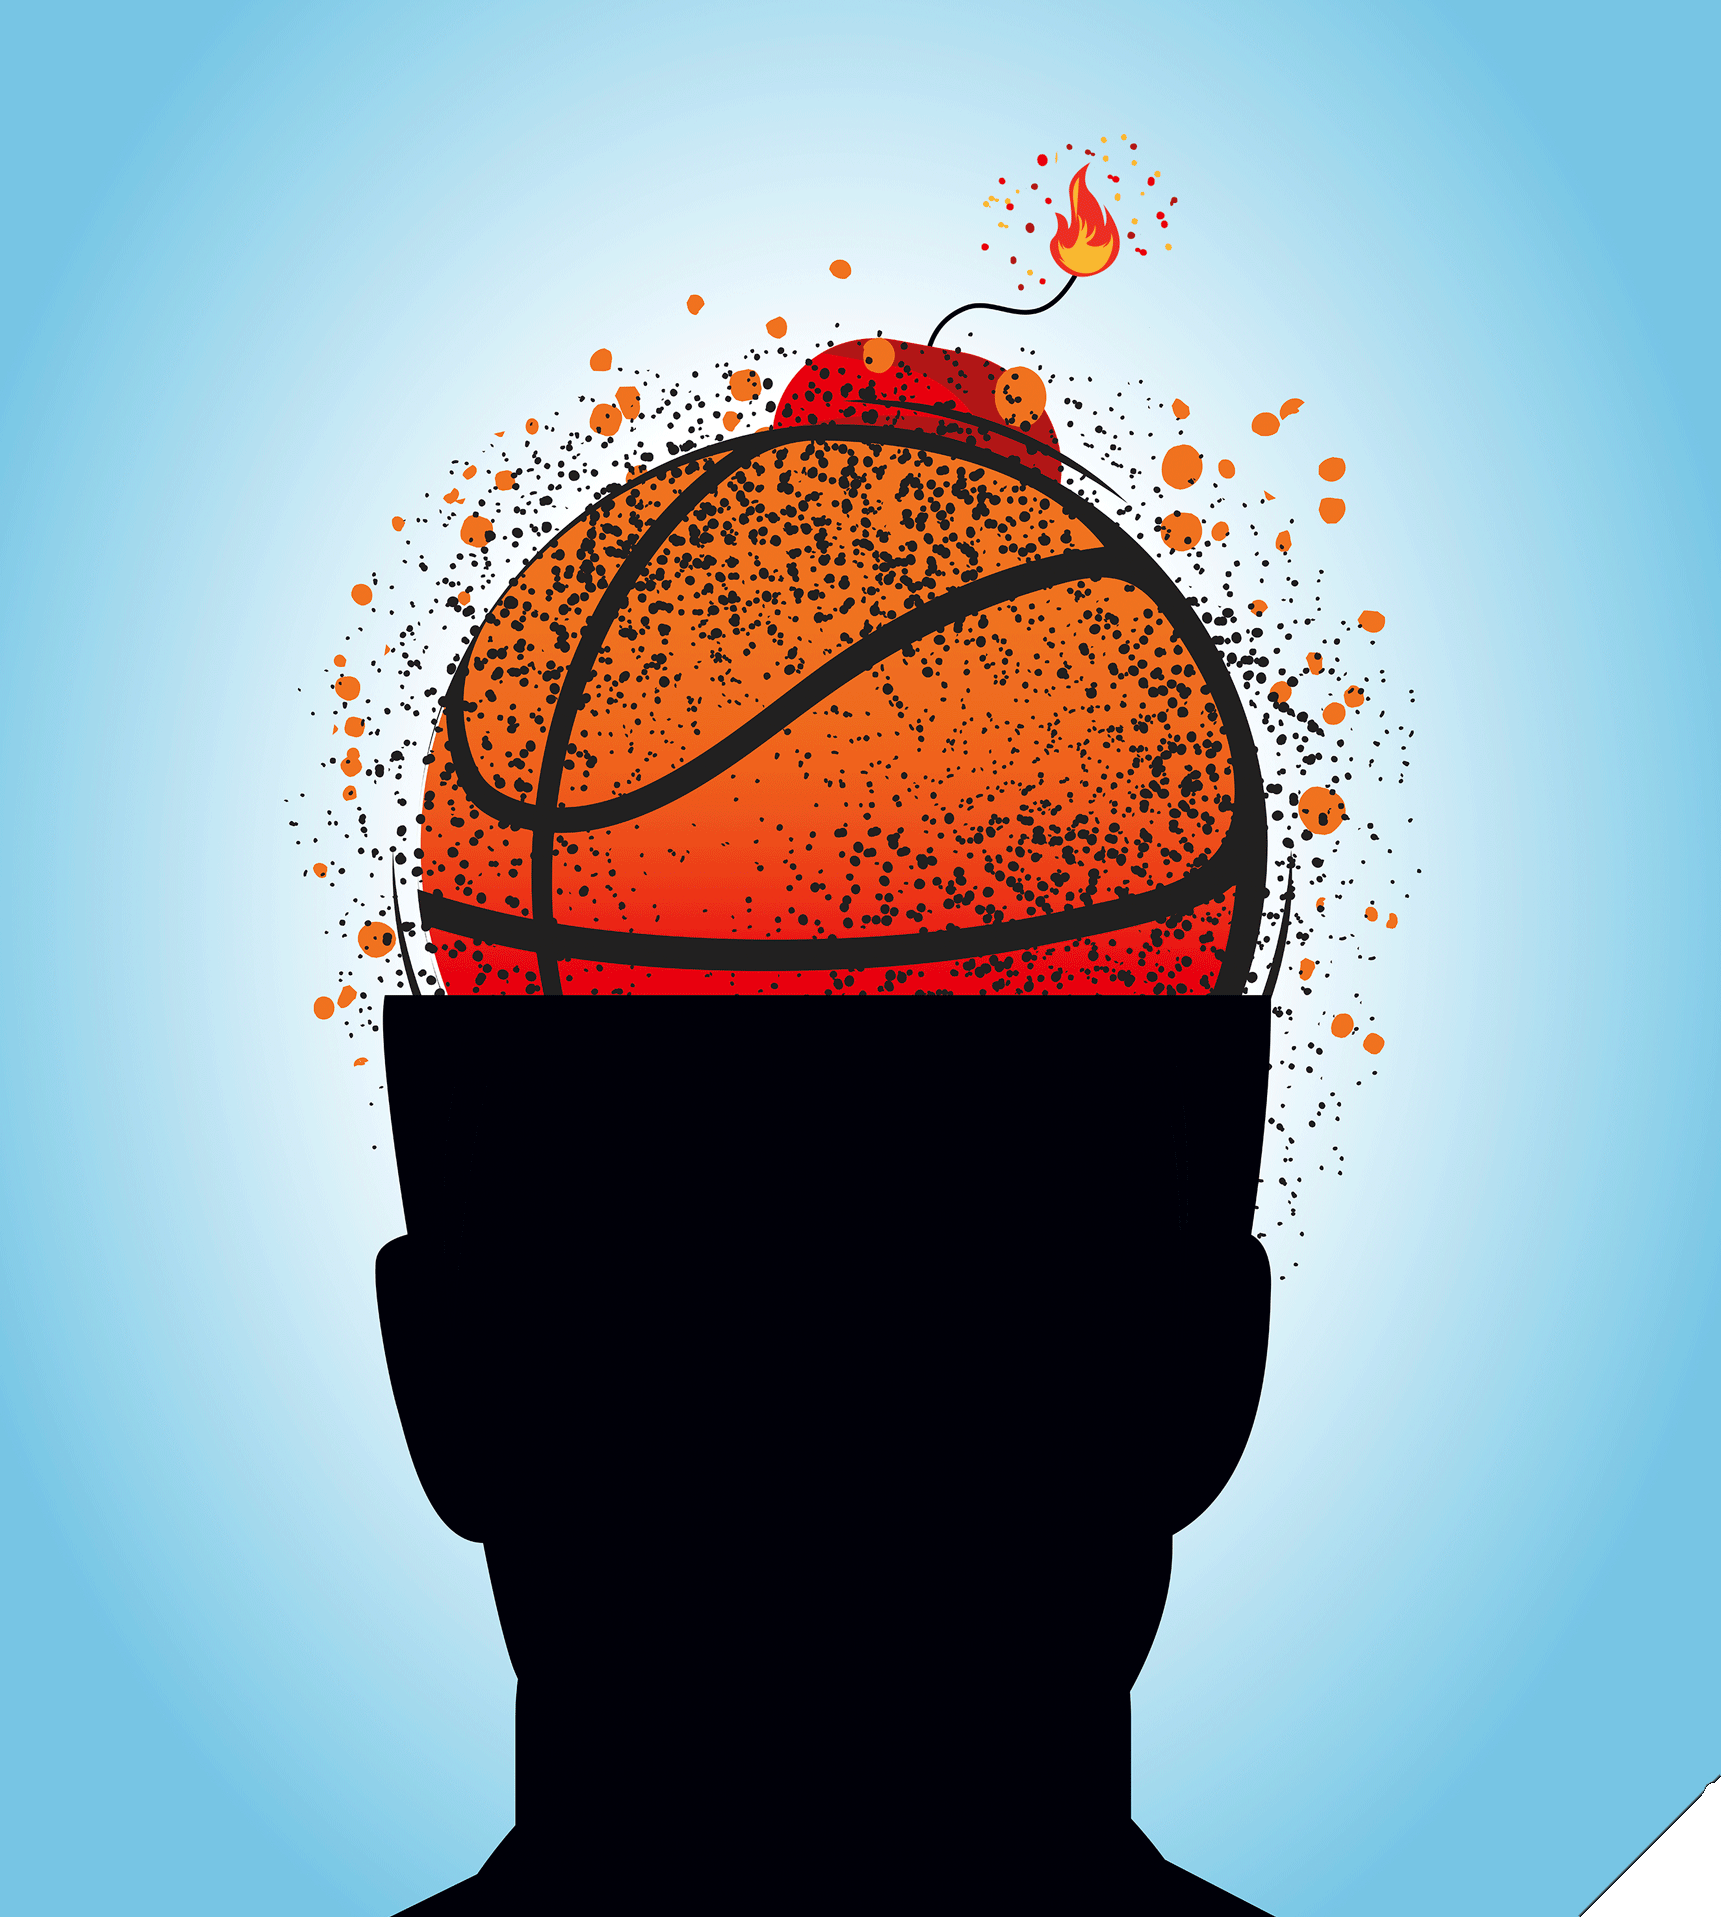 A basketball acts as a brain and a ticking time bomb in this illustration